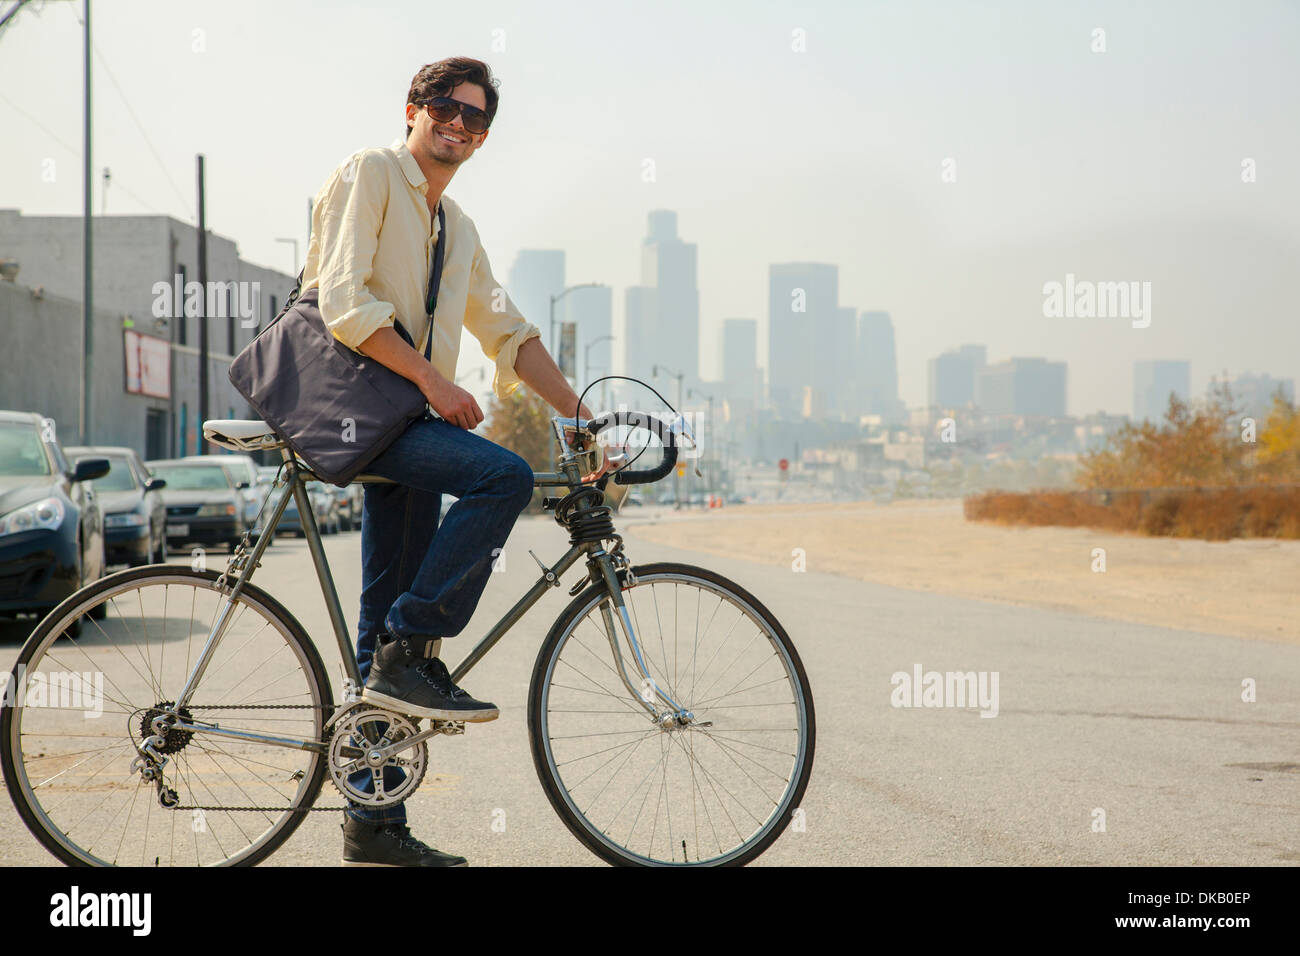 Young man on cycle, Los Angeles, California, USA Stock Photo